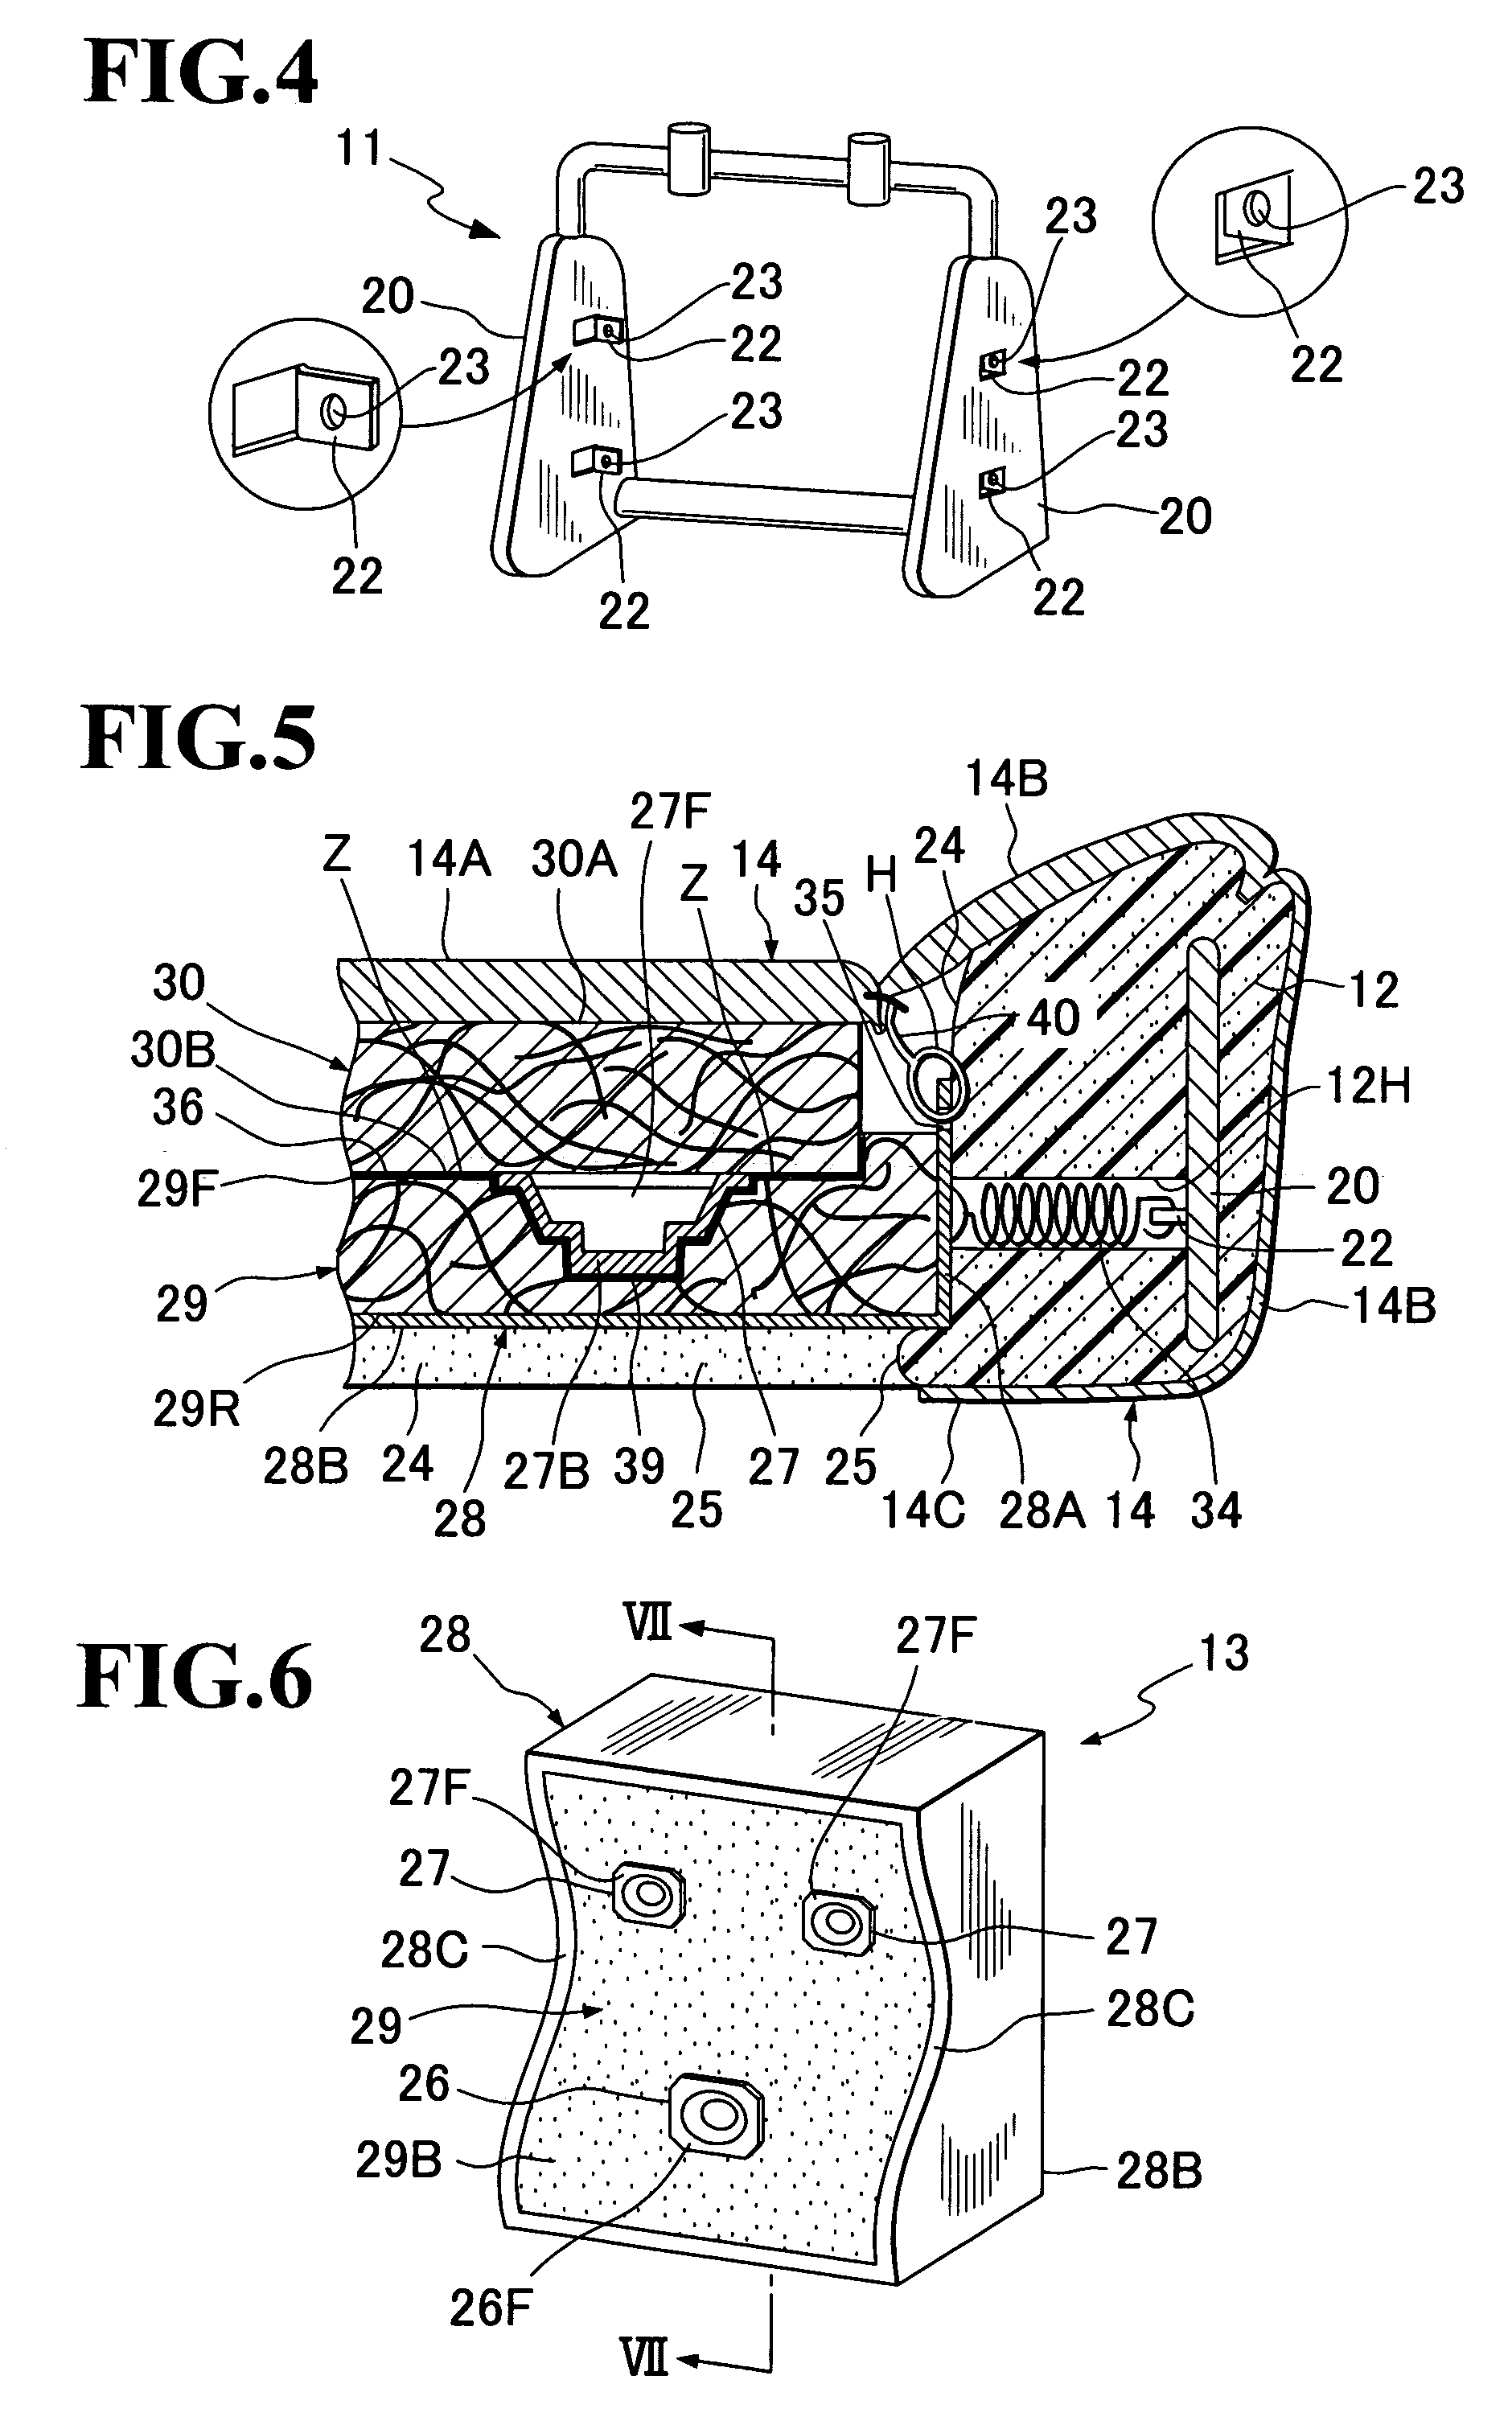 Acoustic structure of seat back